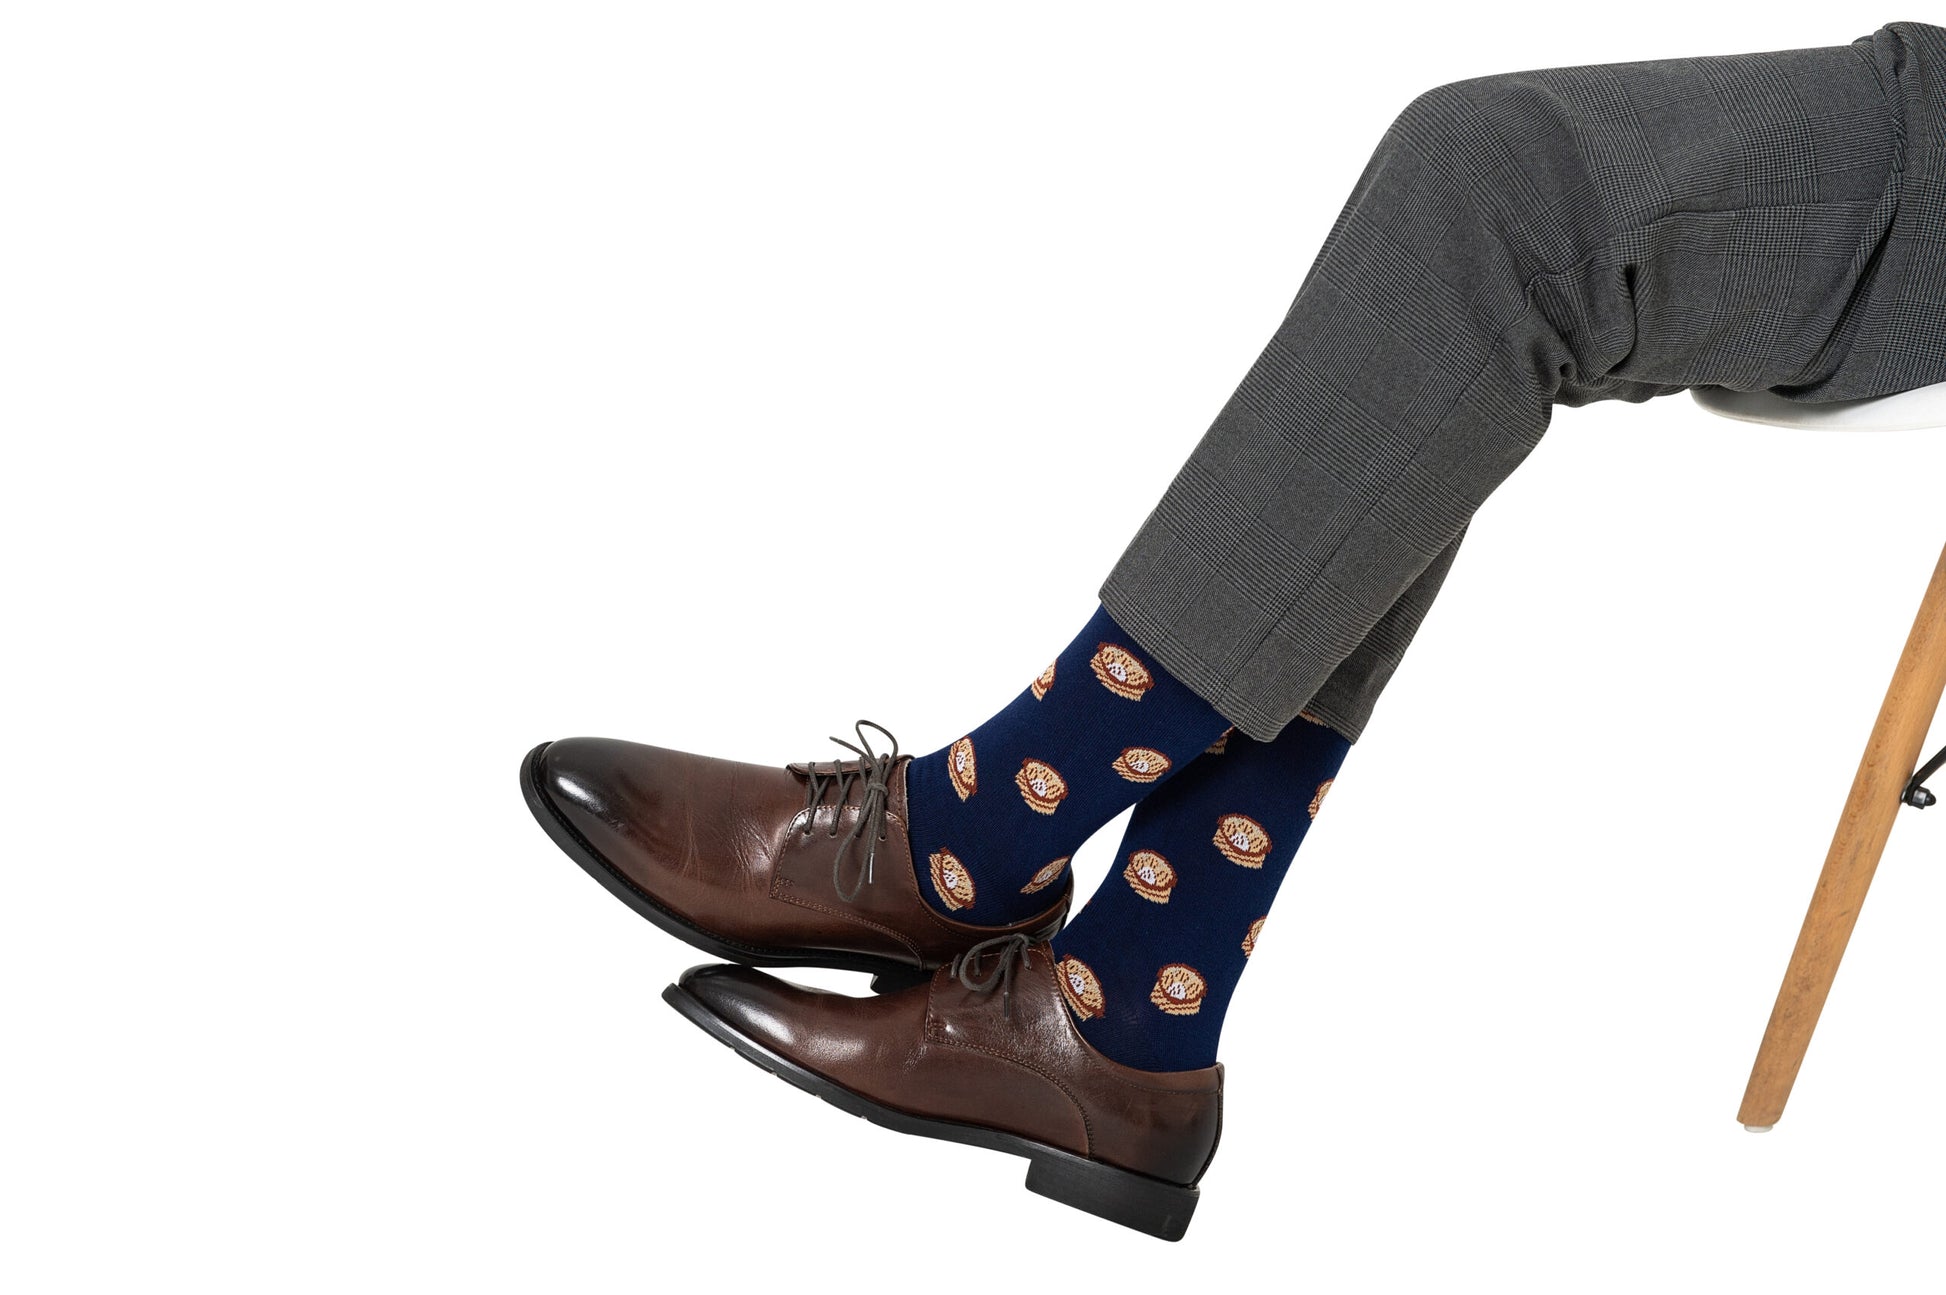 A pair of legs with brown shoes and Dumpling Socks.